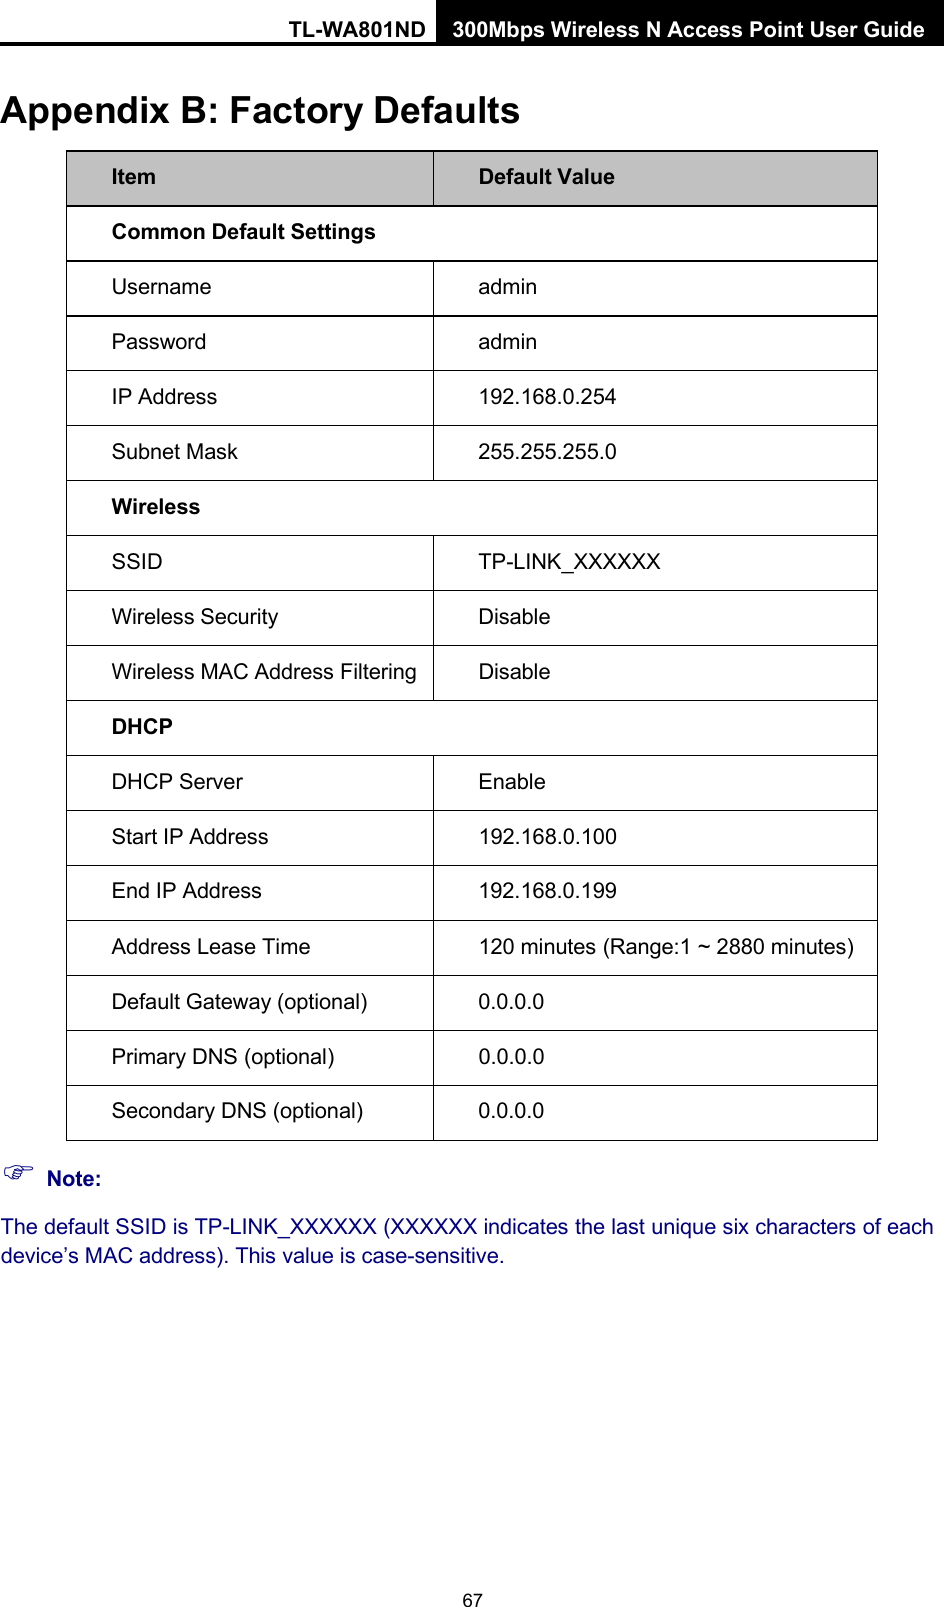 TL-WA801ND 300Mbps Wireless N Access Point User Guide 67    Appendix B: Factory Defaults  Item Default Value Common Default Settings Username admin Password admin IP Address 192.168.0.254 Subnet Mask 255.255.255.0 Wireless SSID TP-LINK_XXXXXX Wireless Security Disable Wireless MAC Address Filtering Disable DHCP DHCP Server Enable Start IP Address 192.168.0.100 End IP Address 192.168.0.199 Address Lease Time 120 minutes (Range:1 ~ 2880 minutes) Default Gateway (optional) 0.0.0.0 Primary DNS (optional) 0.0.0.0 Secondary DNS (optional) 0.0.0.0  Note: The default SSID is TP-LINK_XXXXXX (XXXXXX indicates the last unique six characters of each device’s MAC address). This value is case-sensitive. 